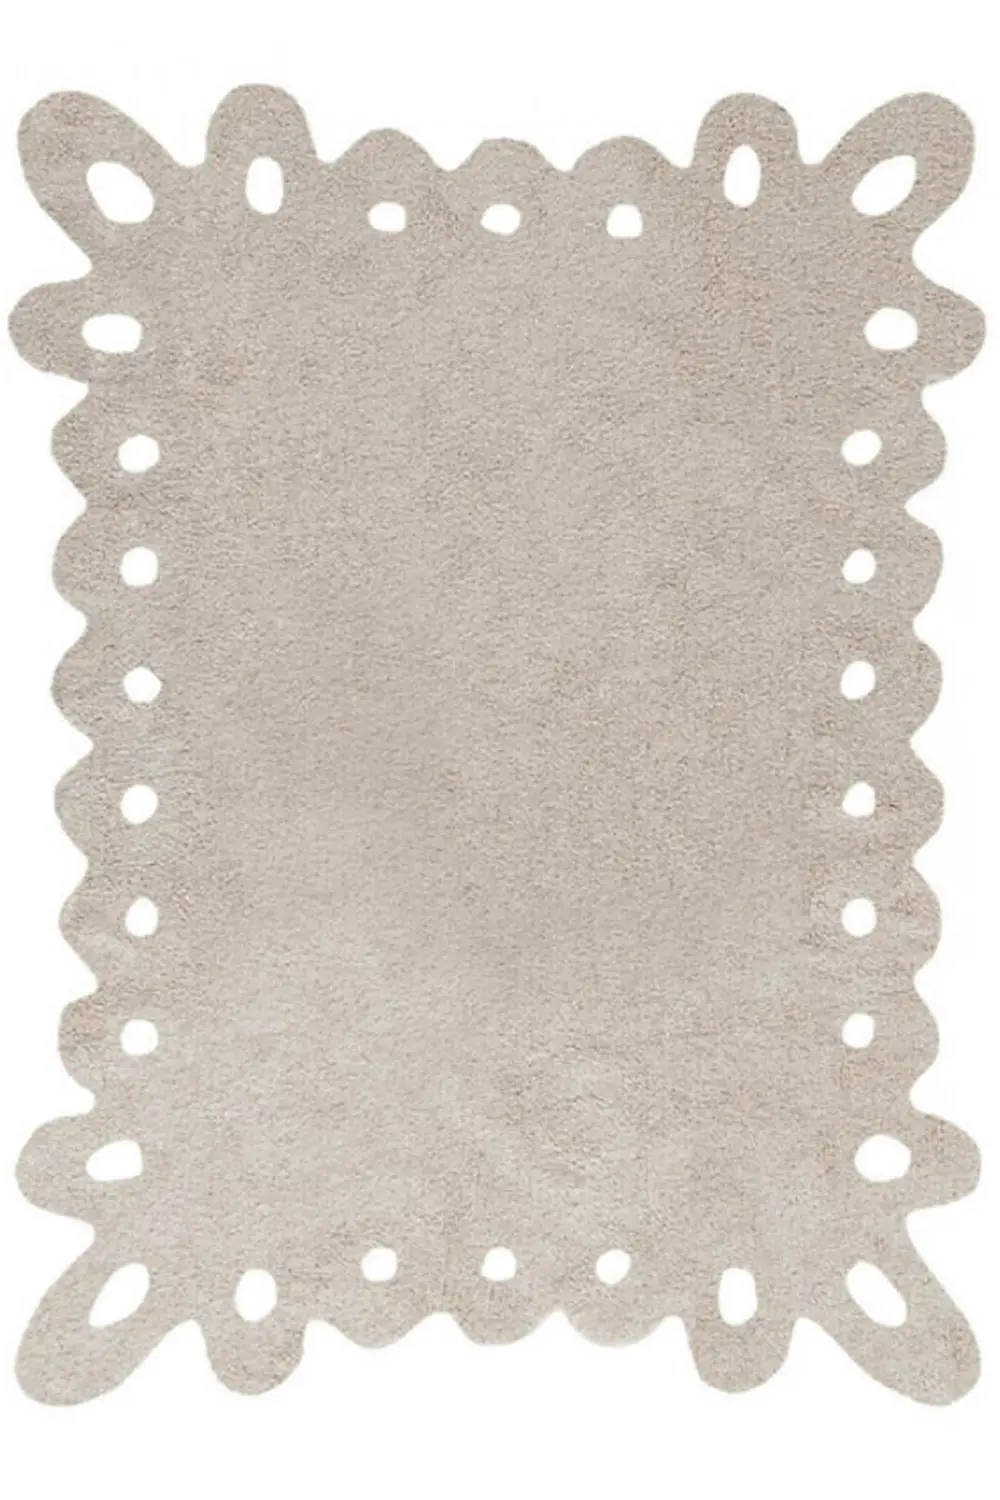 C-00008 4 x 5 Small Lace Beige Washable Rug-1